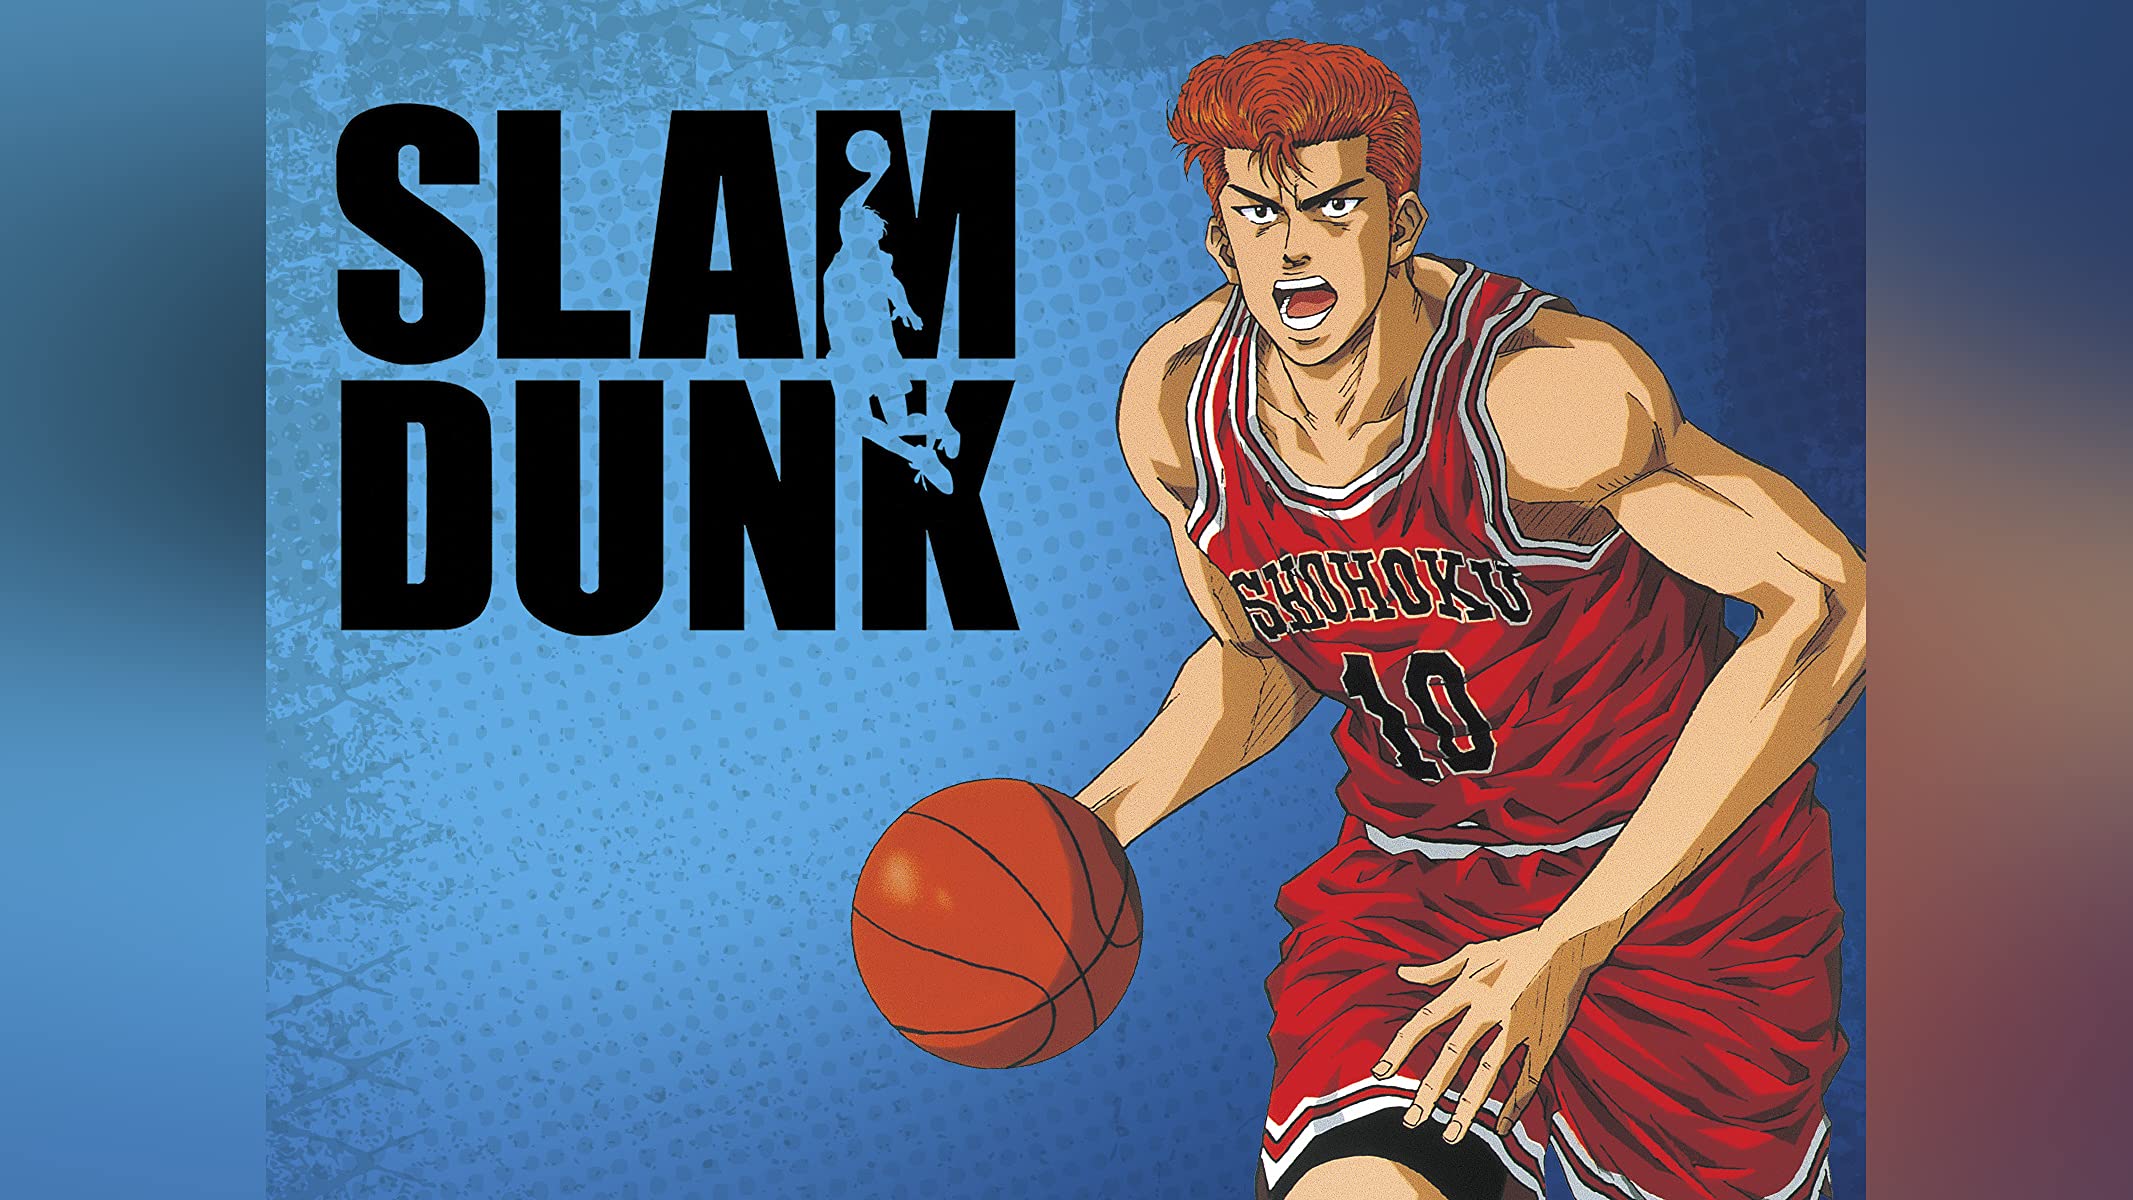 Where to Watch Slam Dunk: A Guide for Anime Enthusiasts